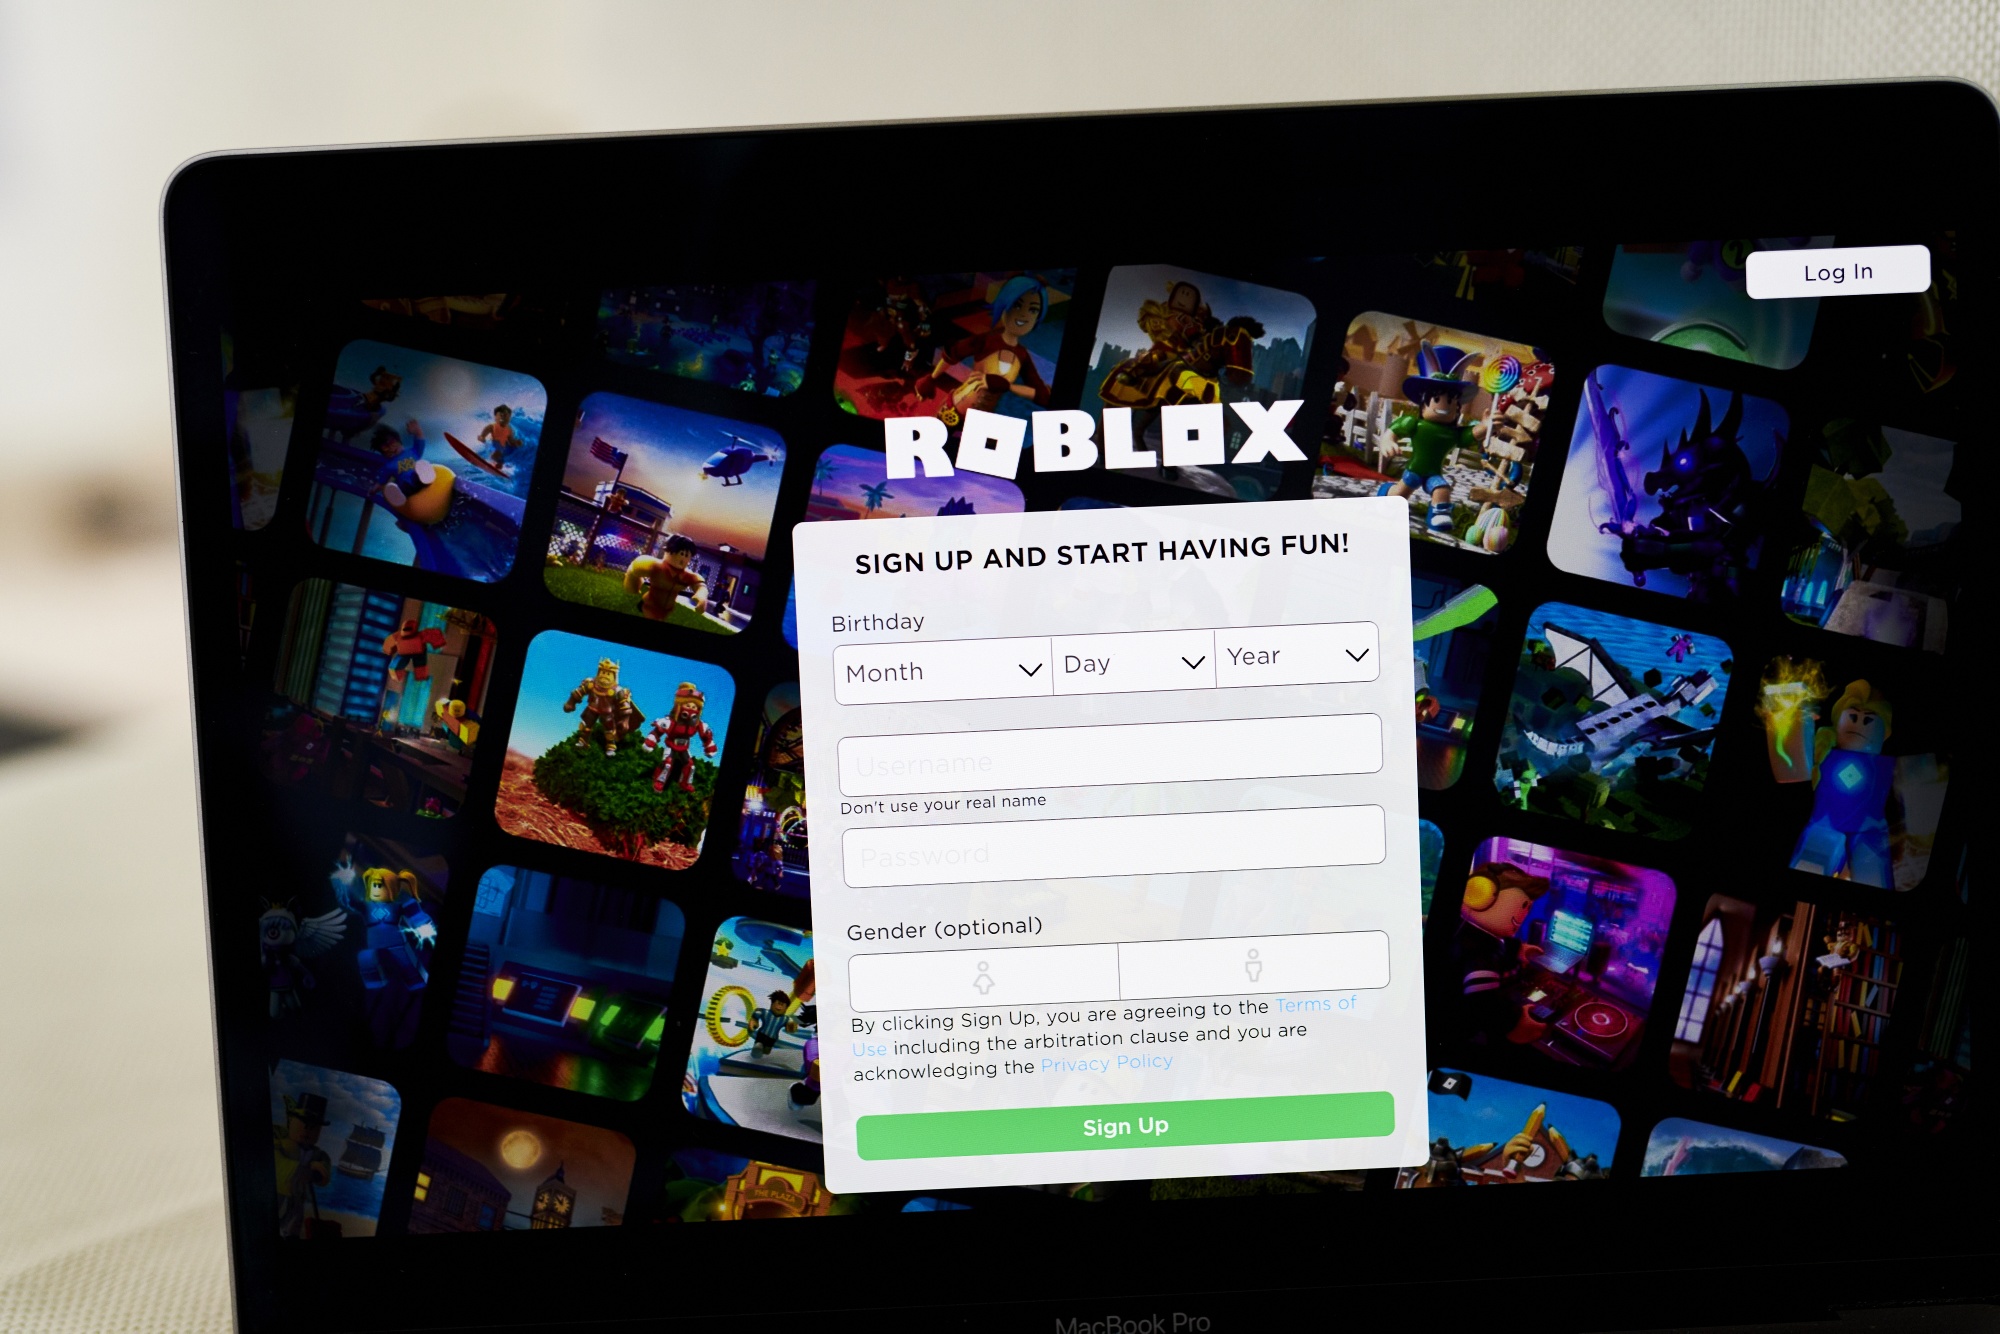 The DeanBeat: Roblox's kid developers make enough 'robux' to pay